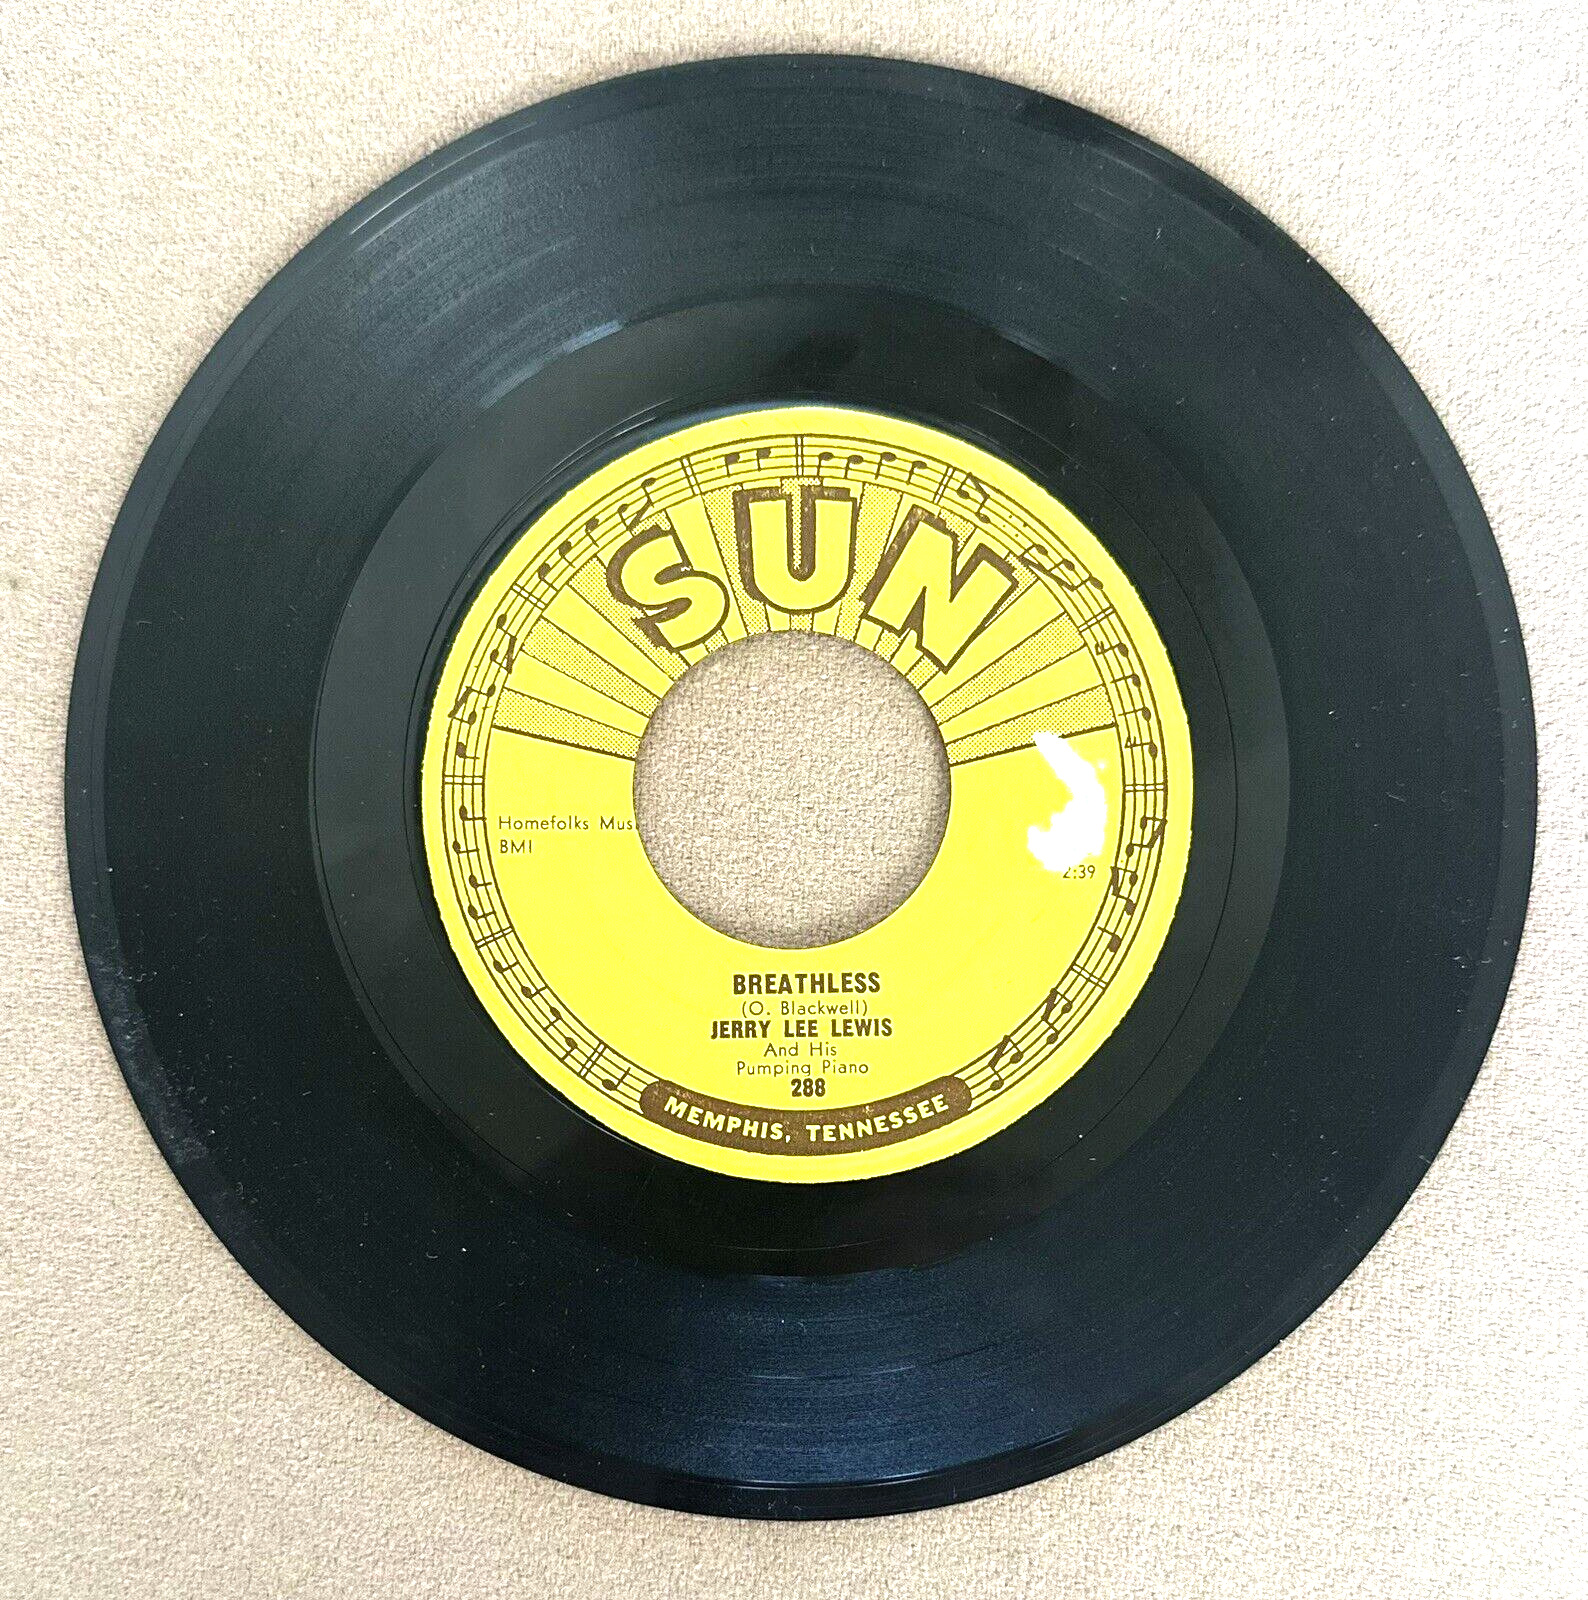 RARE FIND 1958 JERRY LEE LEWIS SUN RECORDS 45 RPM SINGLE RECORD  BREATHLESS